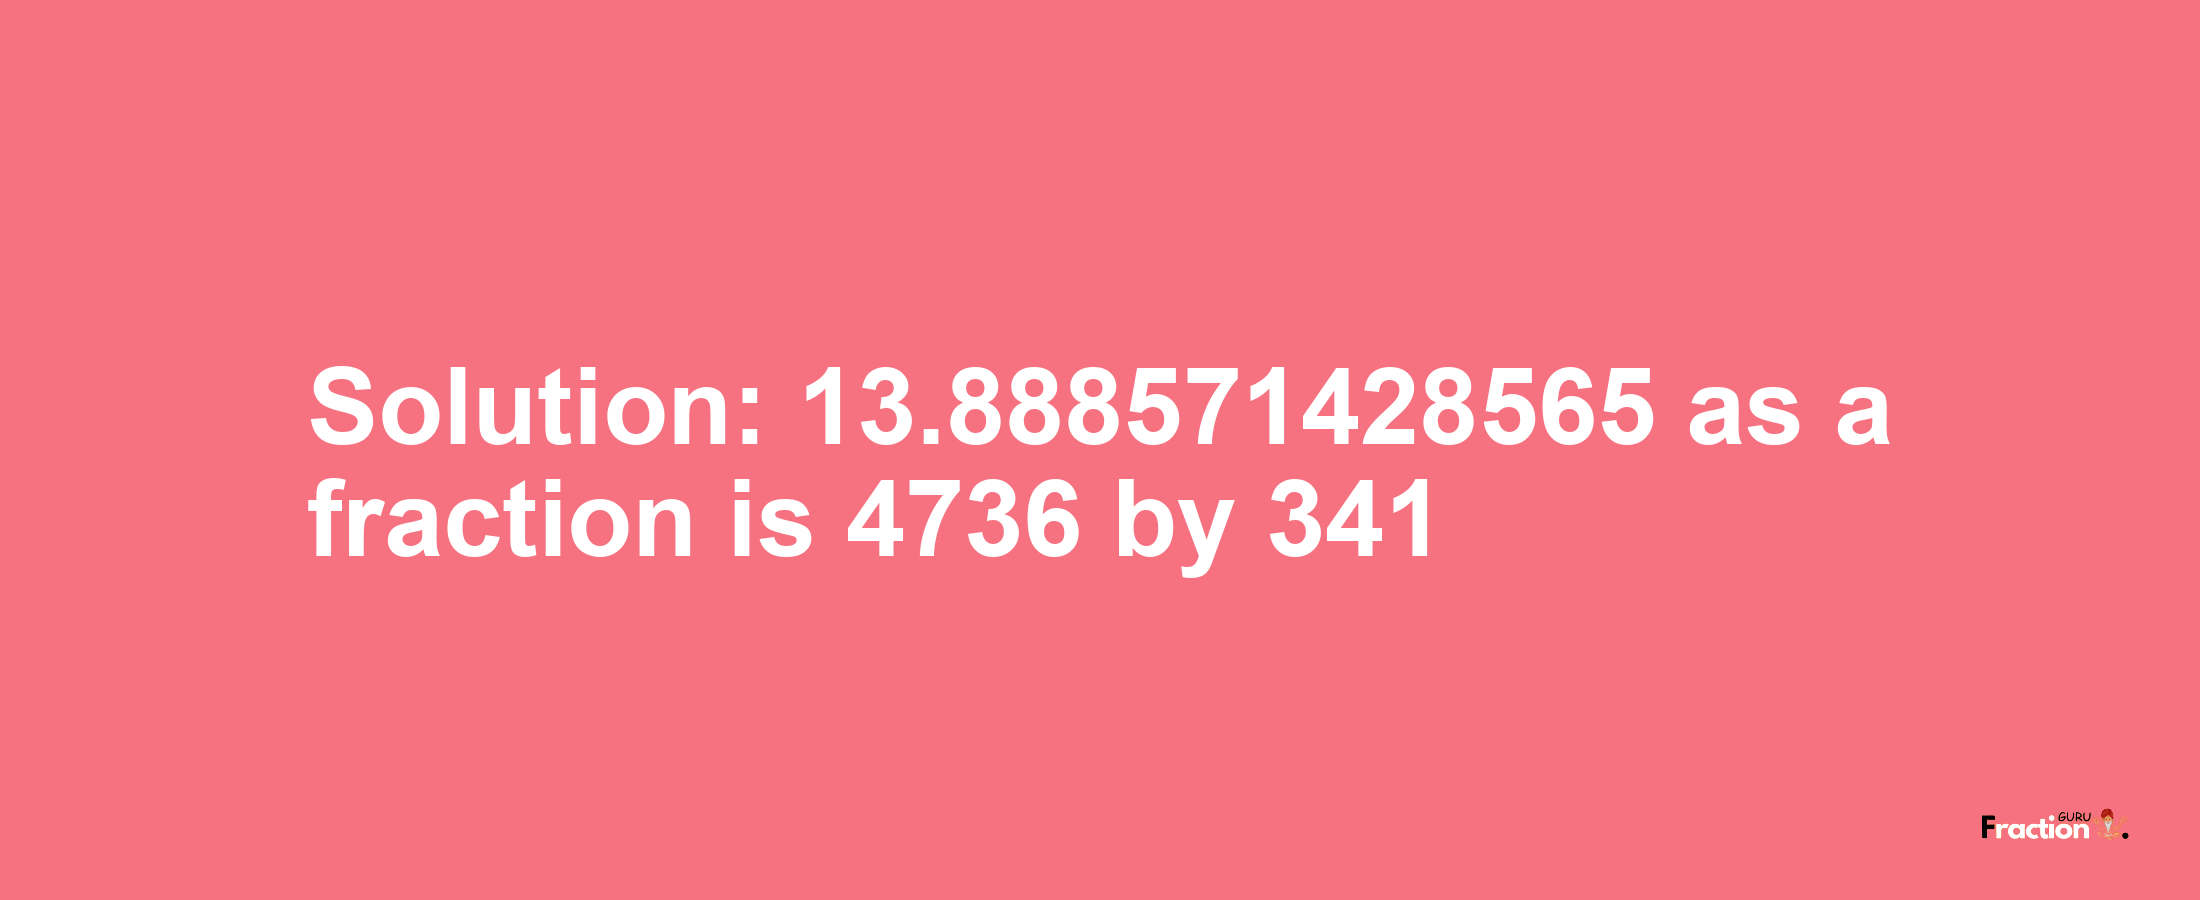 Solution:13.888571428565 as a fraction is 4736/341